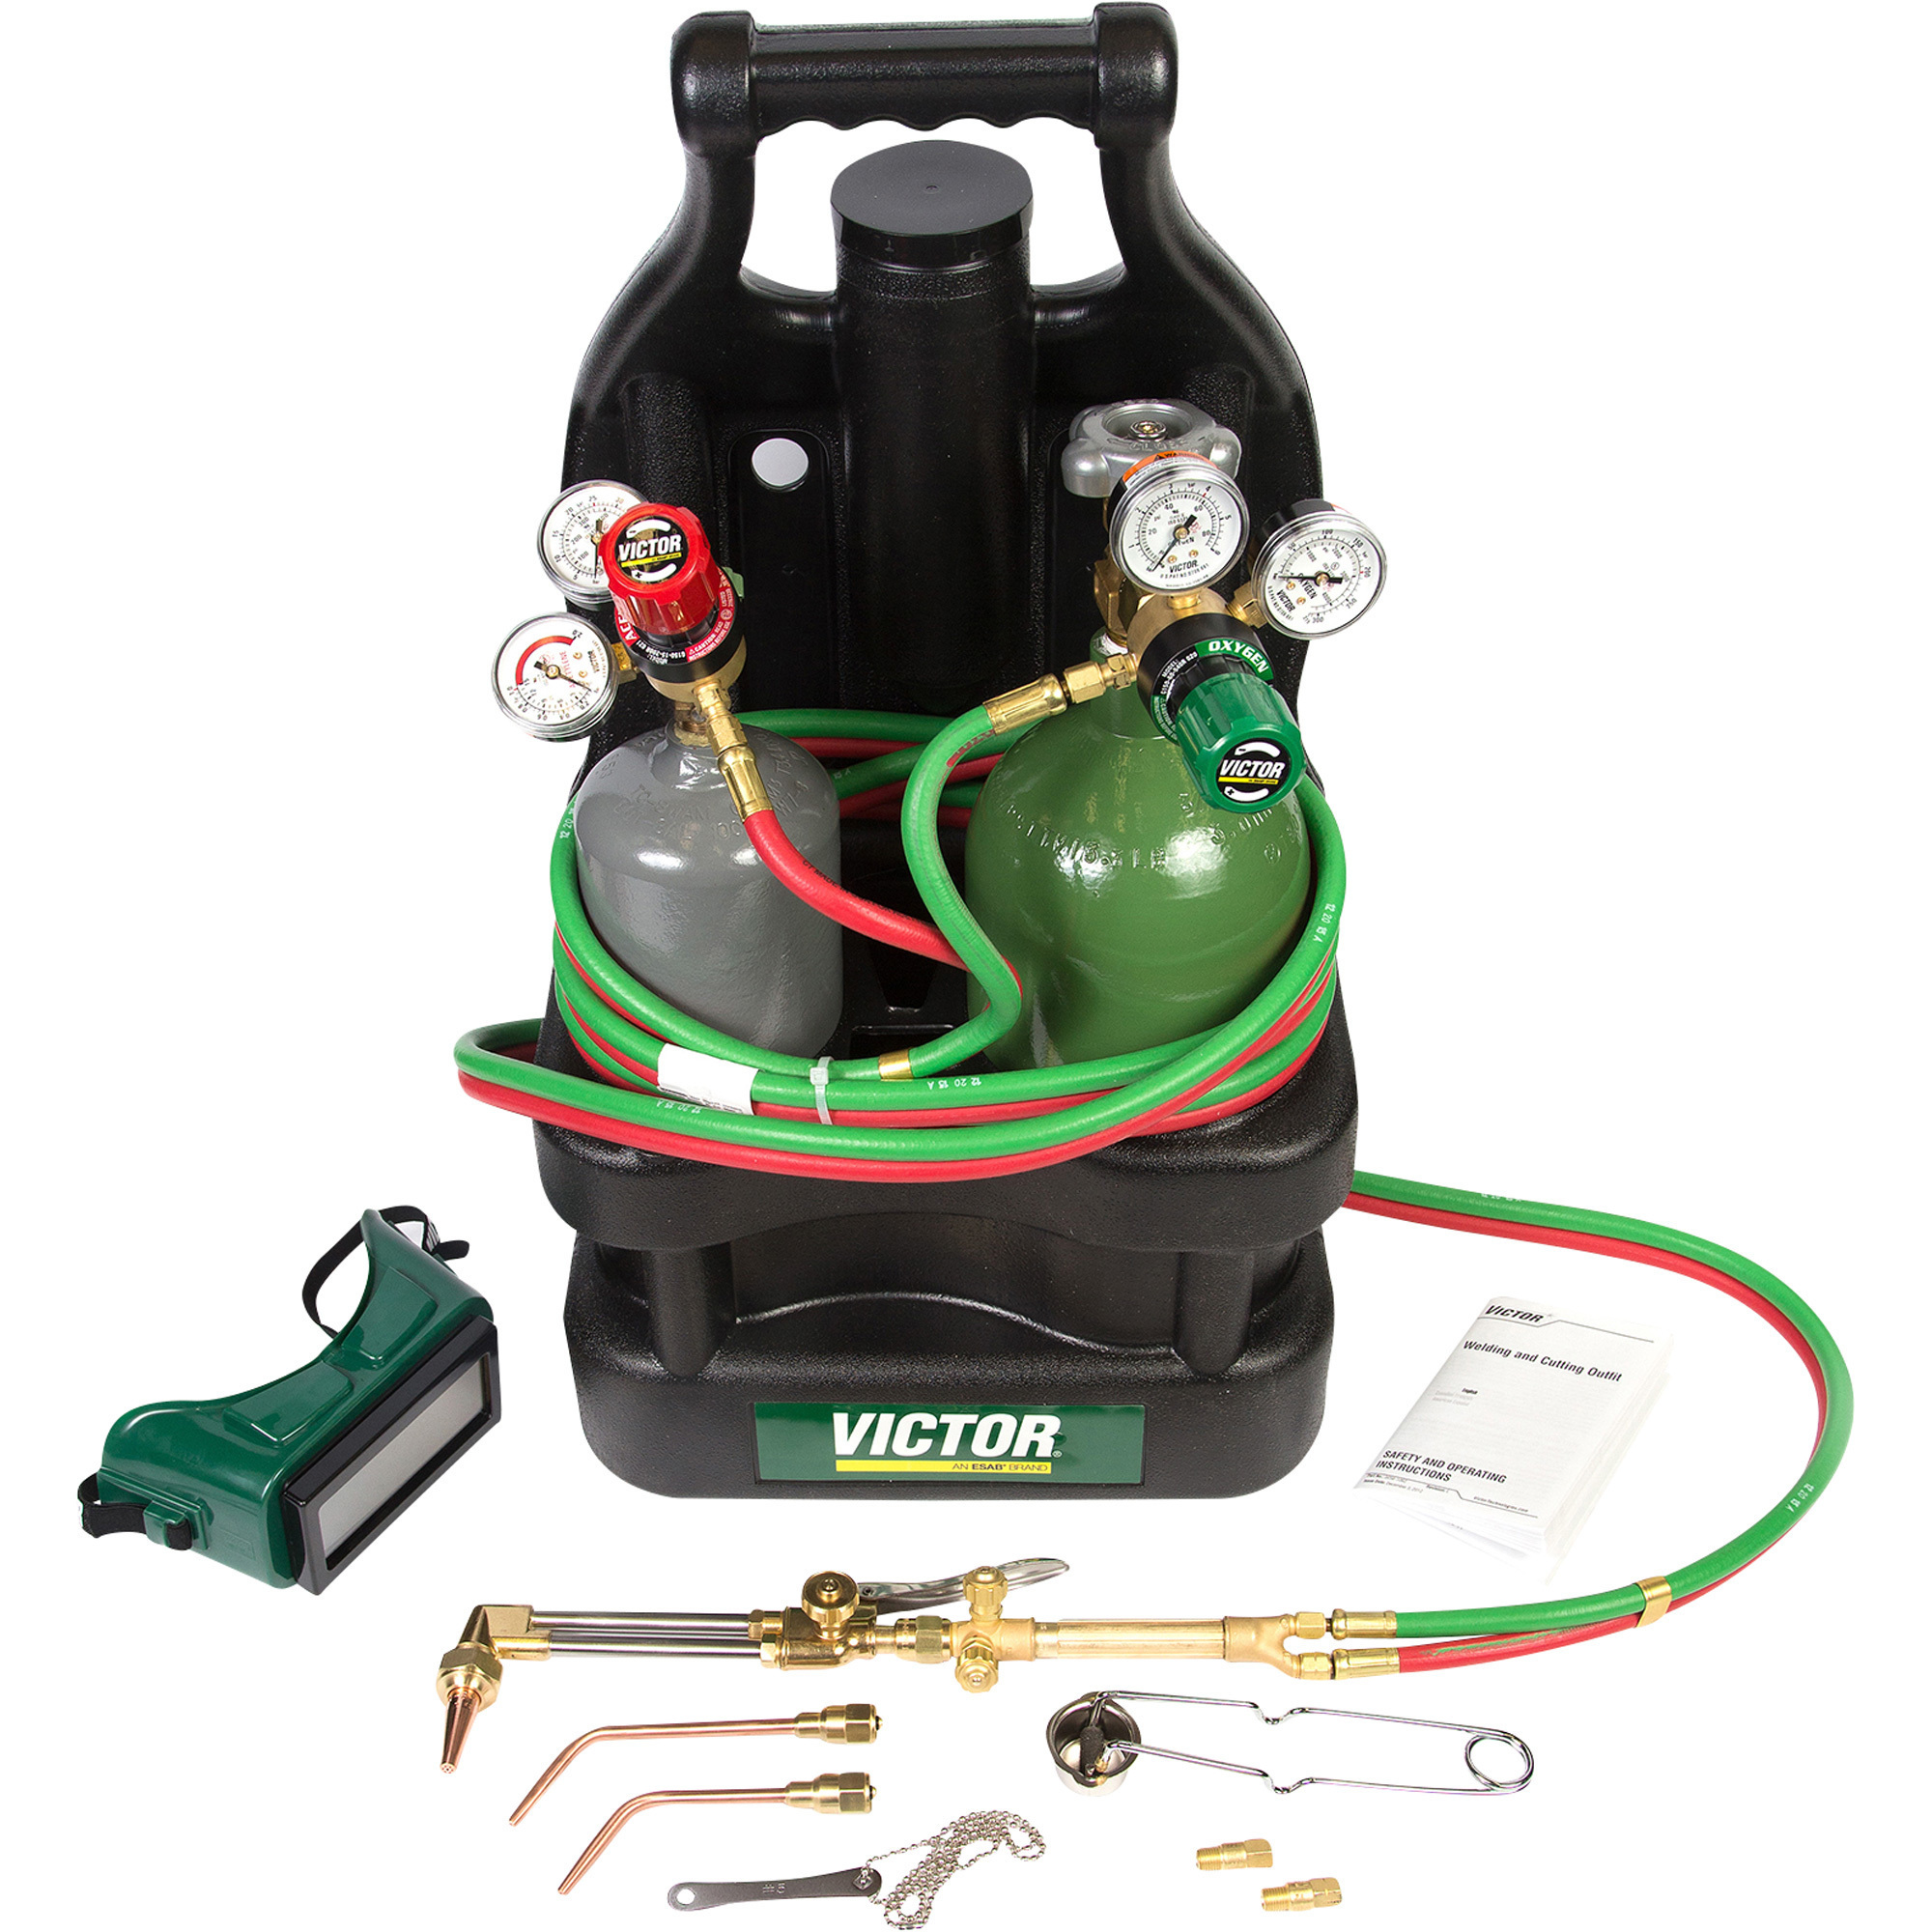 Victor G150 Series J-CPT Portable Welding Tote Kit â Model 0384-0948